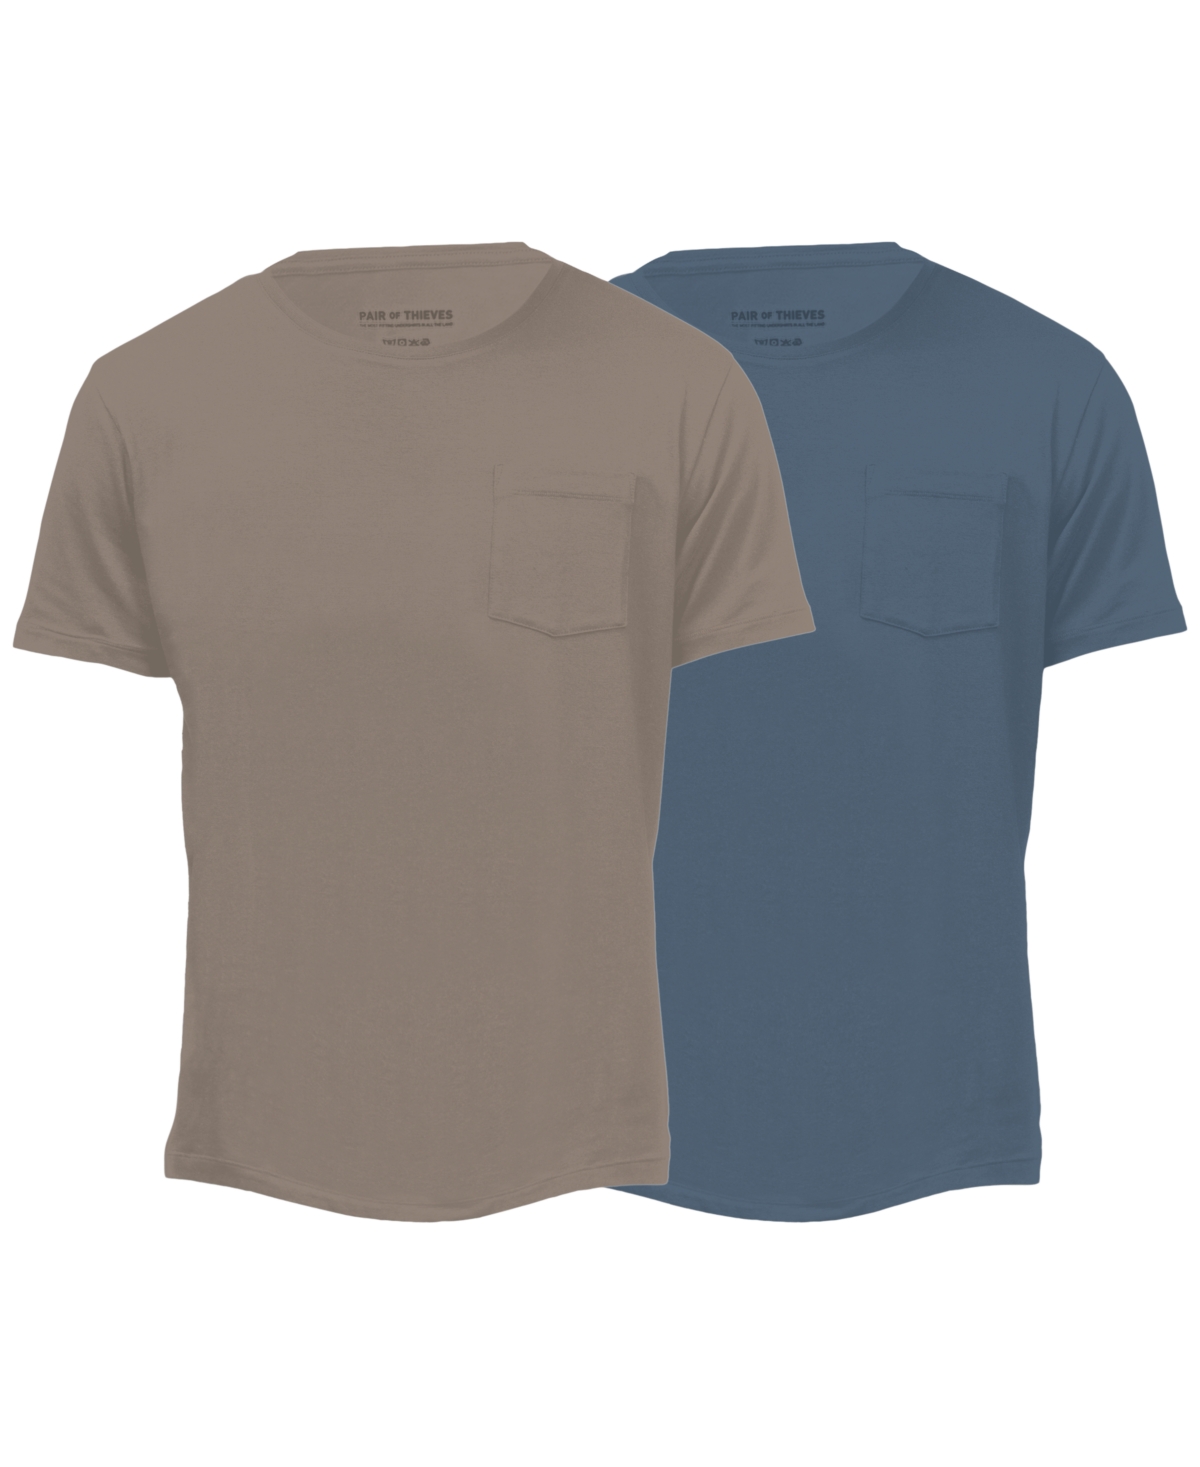 Pair Of Thieves Men's Rfe Supersoft Pocket T-shirts - 2pk. In Beige